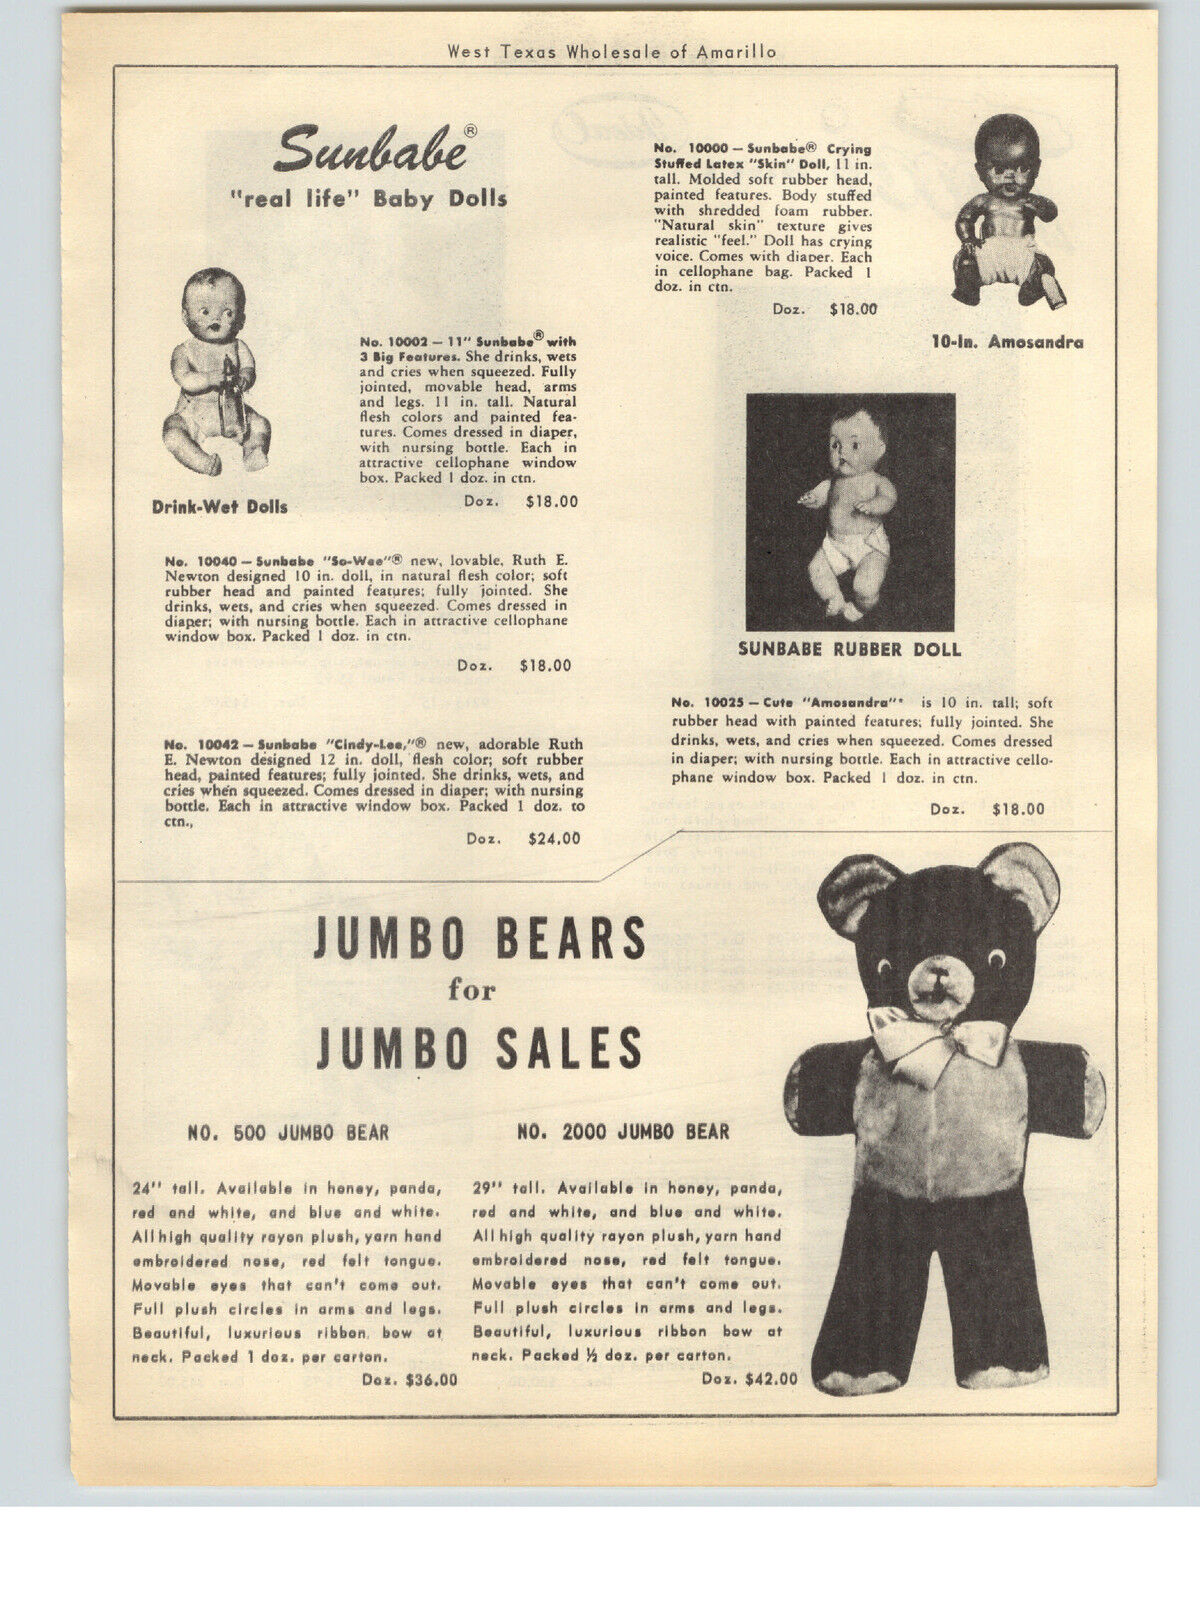 1951 PAPER AD Sunbabe Rubber Doll Amosandra Black Baby Ideal Toni Tickletoes